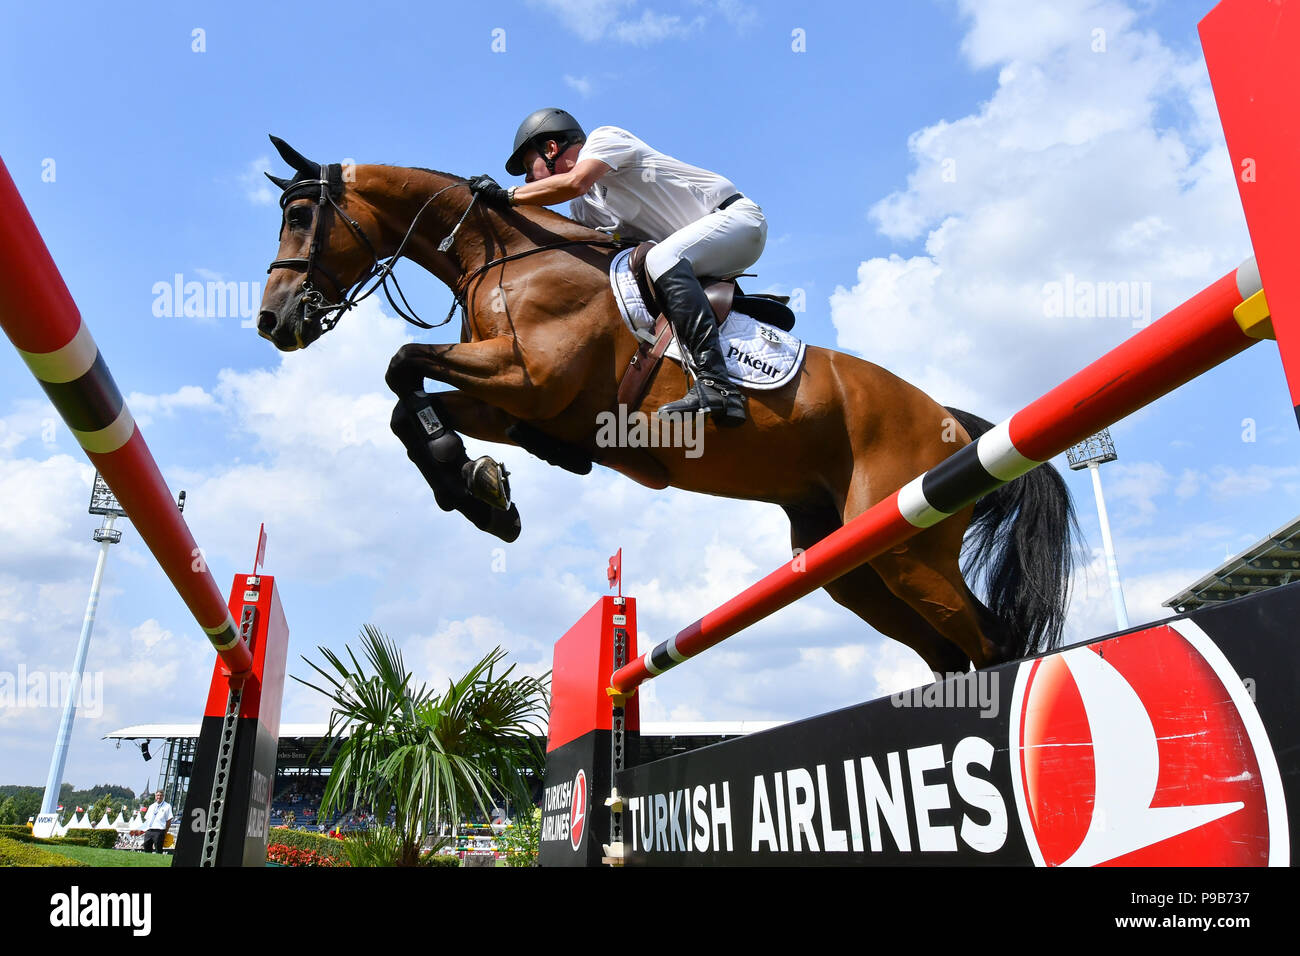 Aachen, Germany. 17th July, 2018. CHIO, equestrian, jumping. The German rider Markus Beerbaum on the horse Cool Hand Luke jumps over an obstacle during the opening jumping. Credit: Uwe Anspach/dpa/Alamy Live News Stock Photo